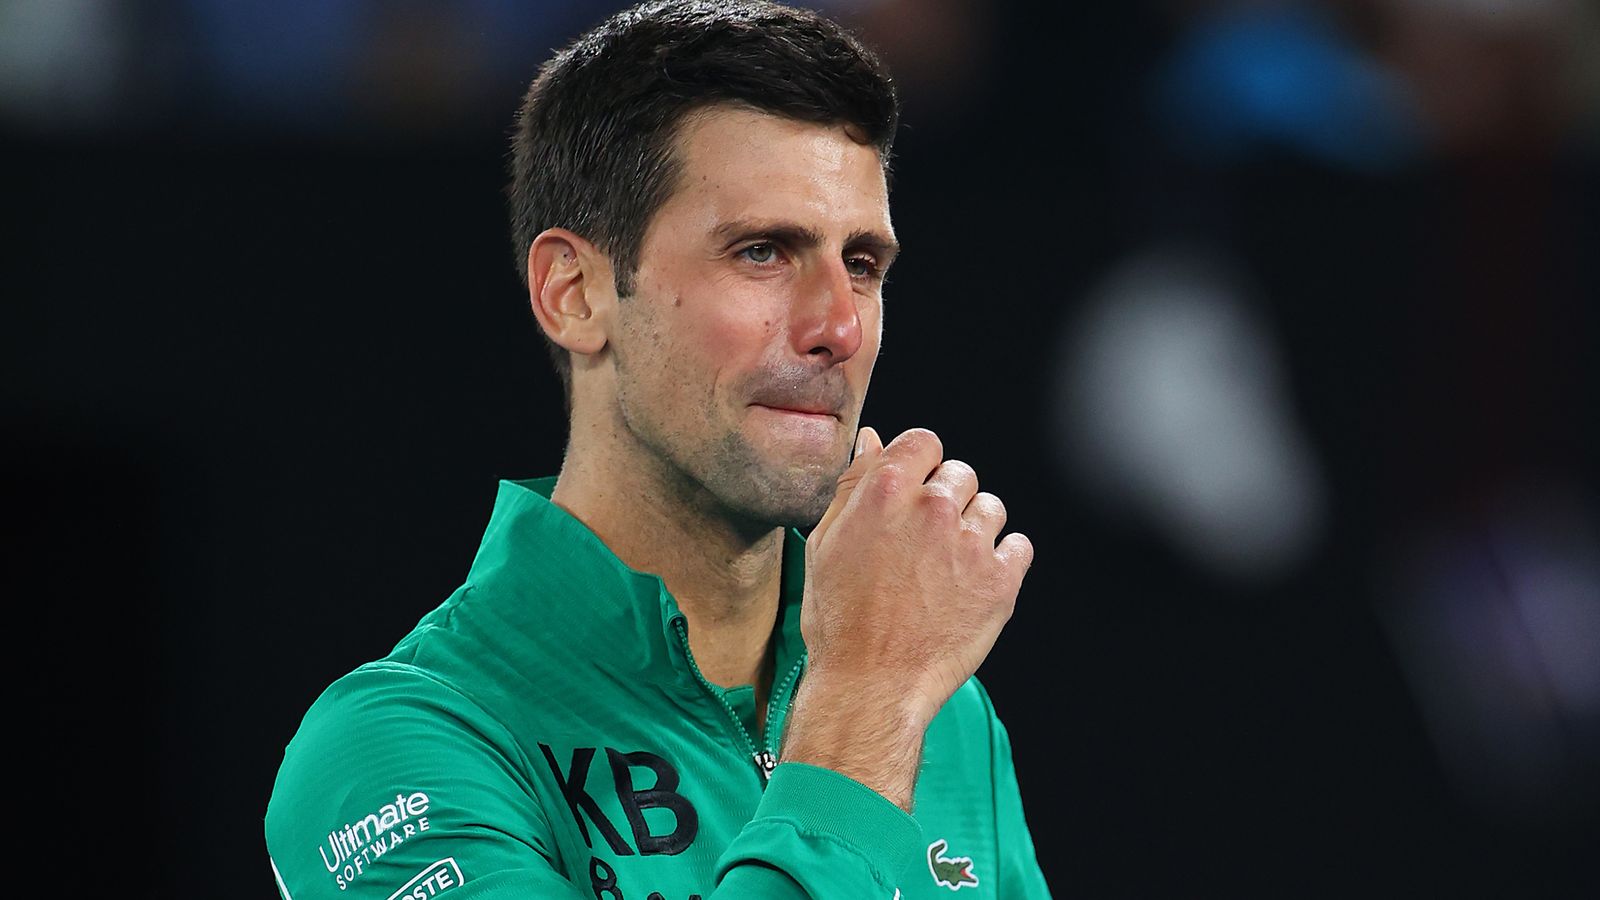 Novak Djokovic pays tribute to Kobe Bryant, who died in a helicopter ...